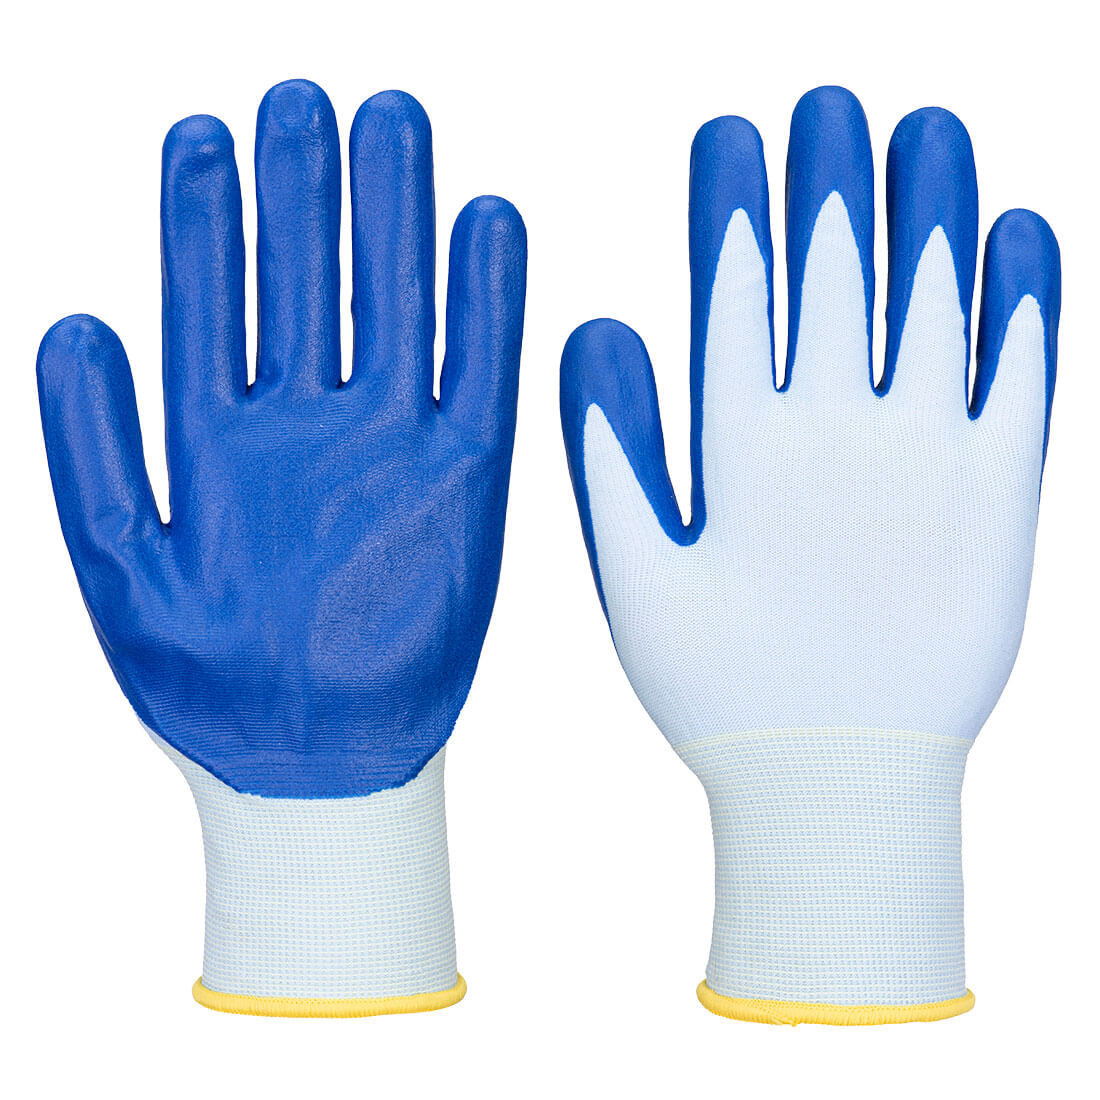 FD Grip 15 Nitrile Glove - Personal protection